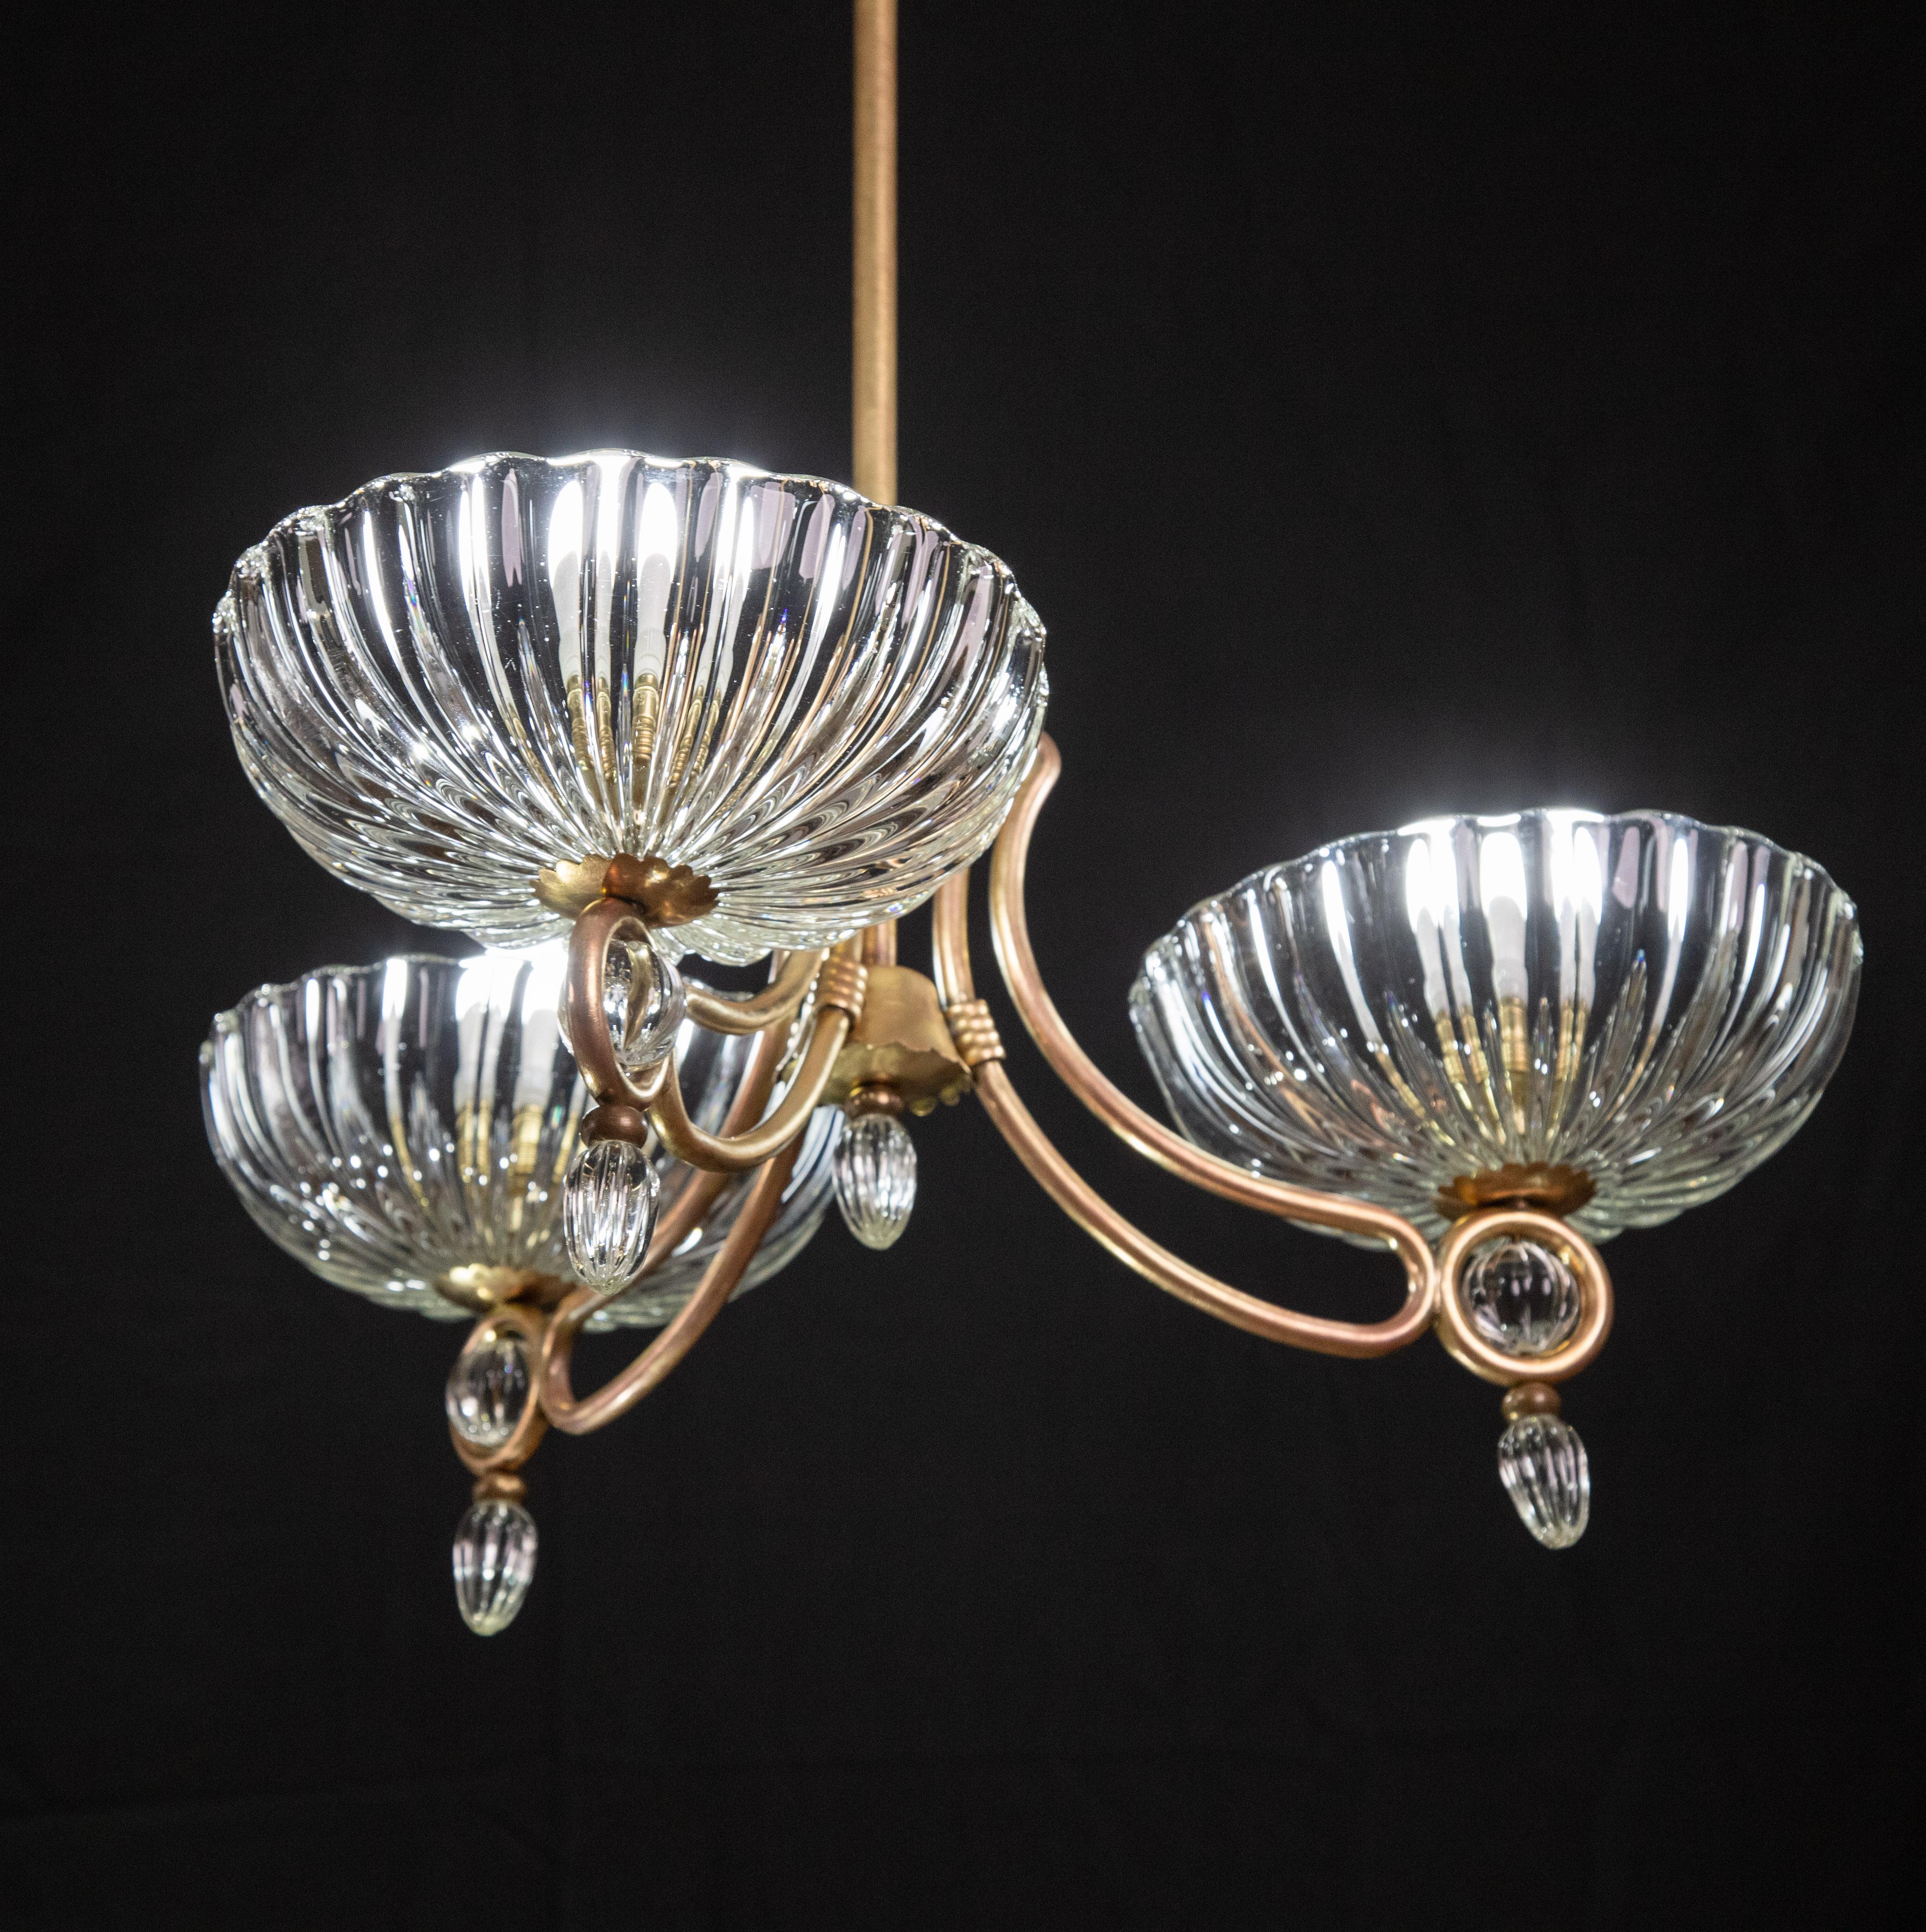 Elegant Ercole Barovier Art Deco Chandelier, 1940s In Good Condition For Sale In Roma, IT